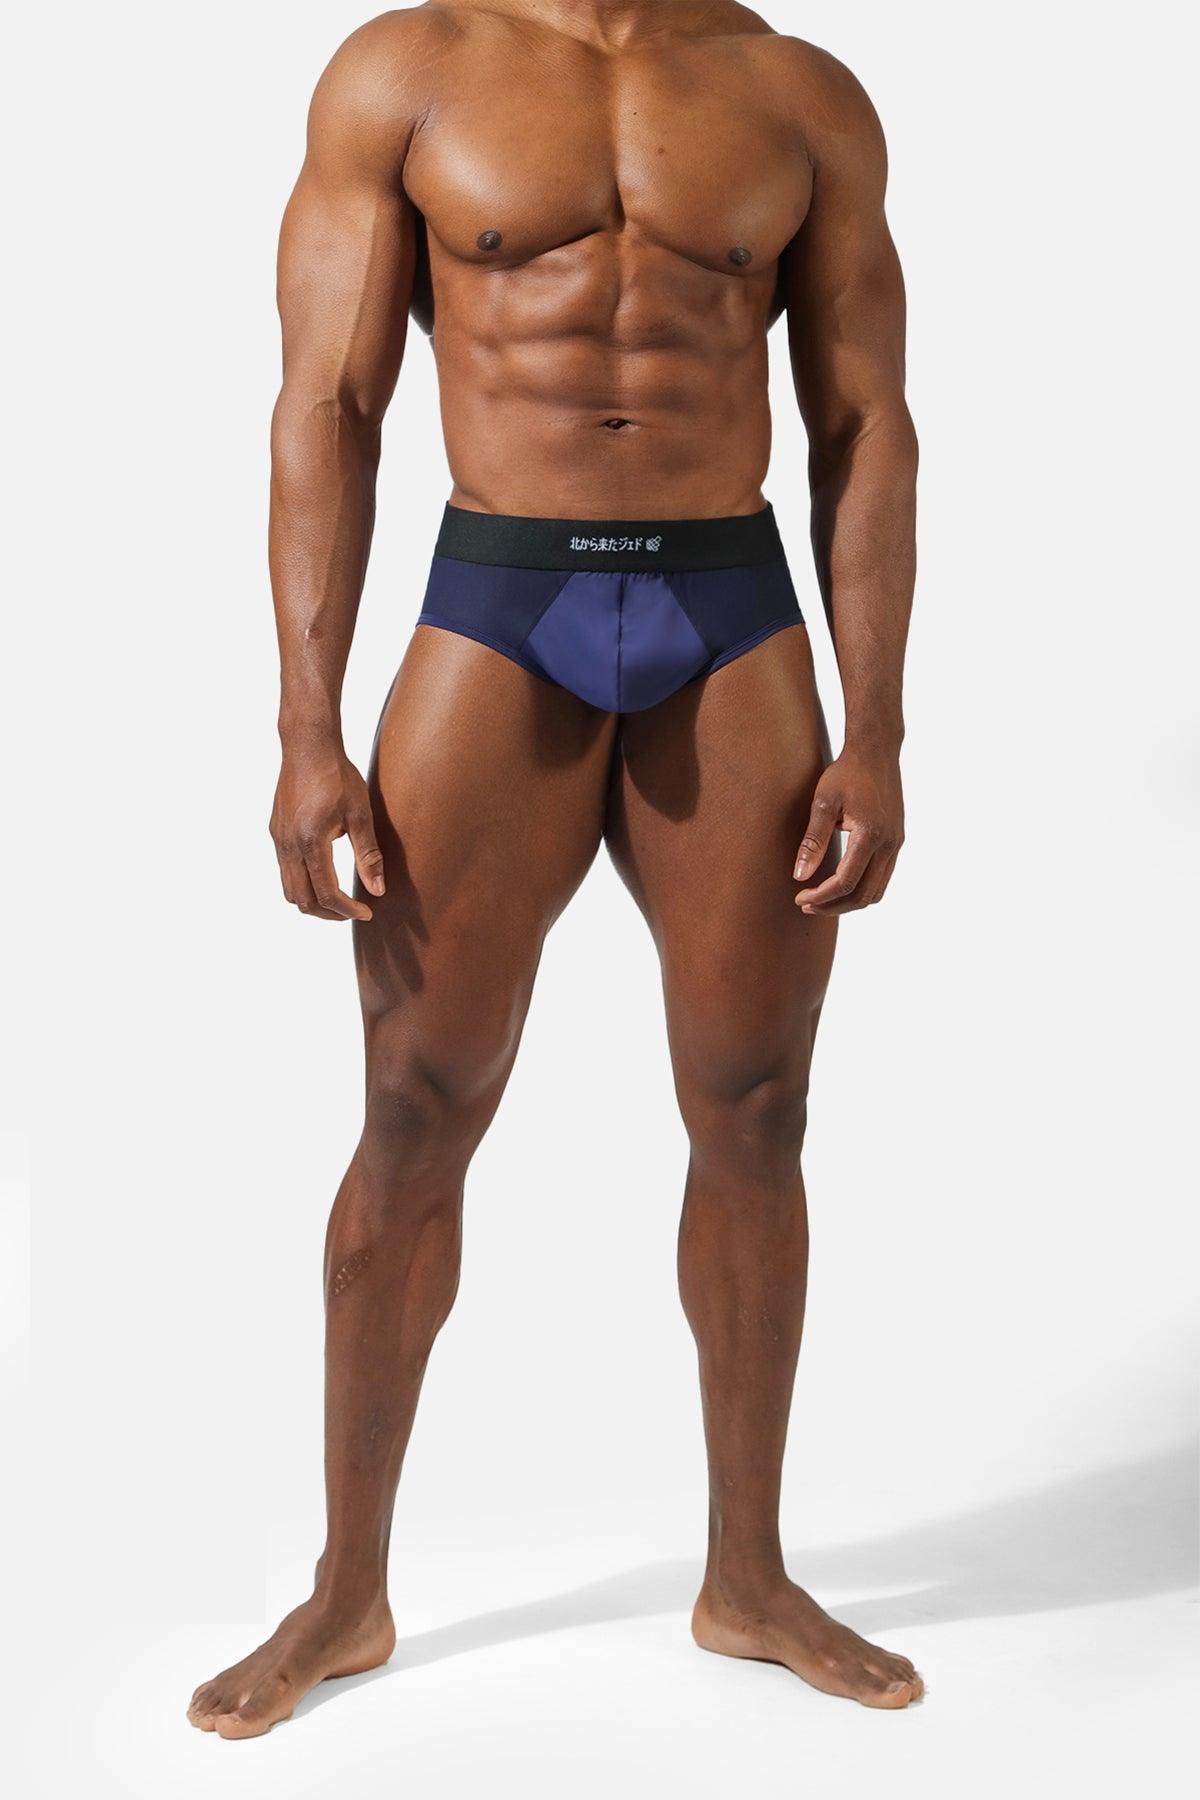 Running Mesh Hollow Vent Hole Mesh Sports Underwear For